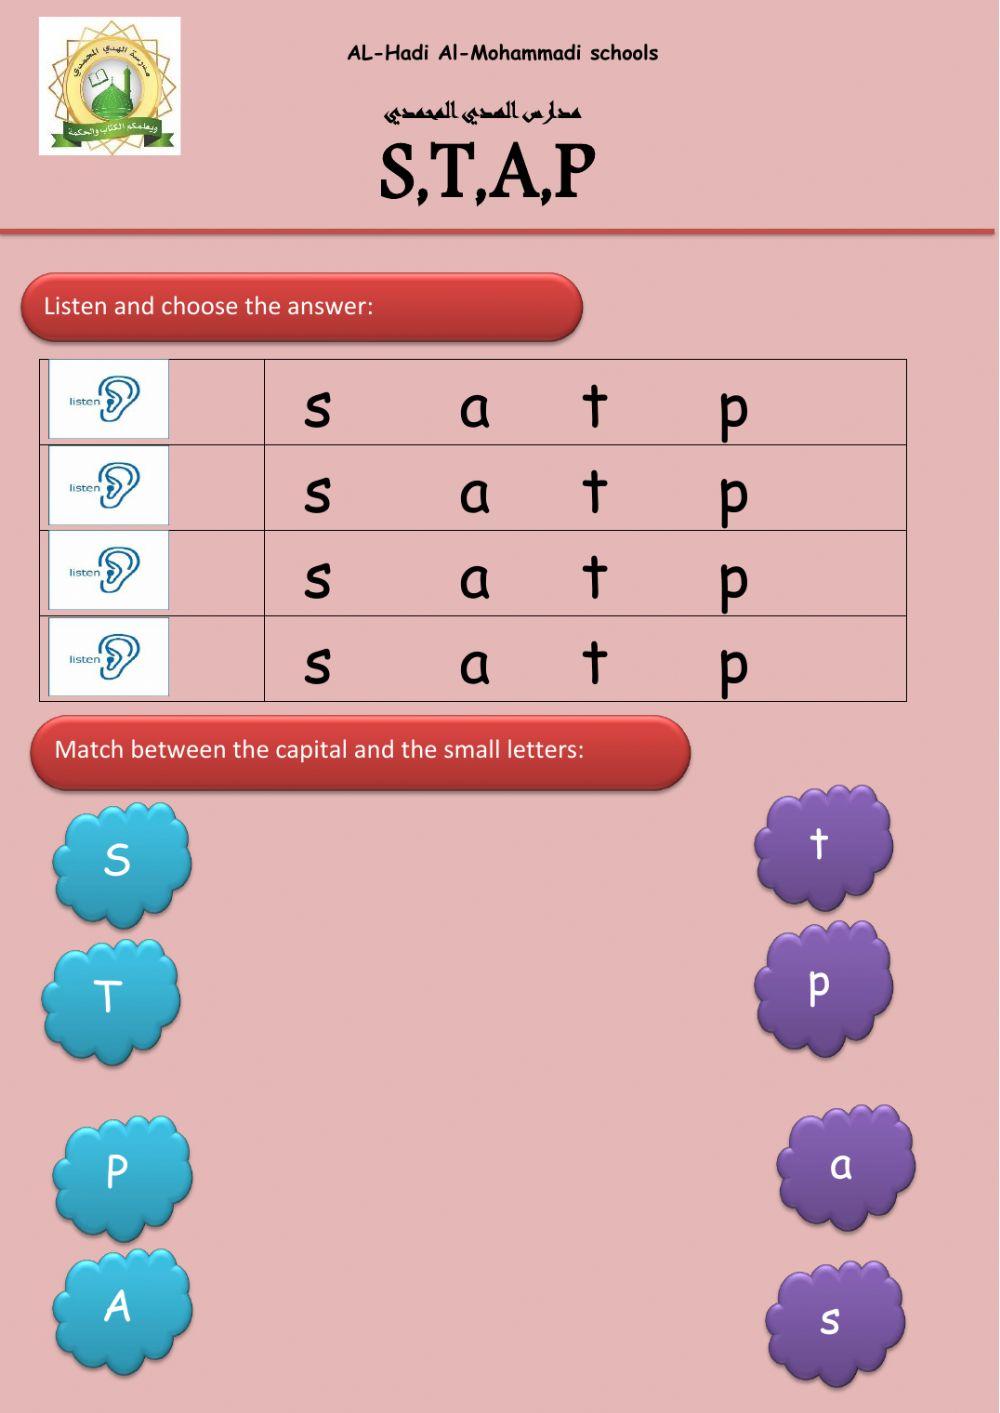 Letters (s,a,t,p)